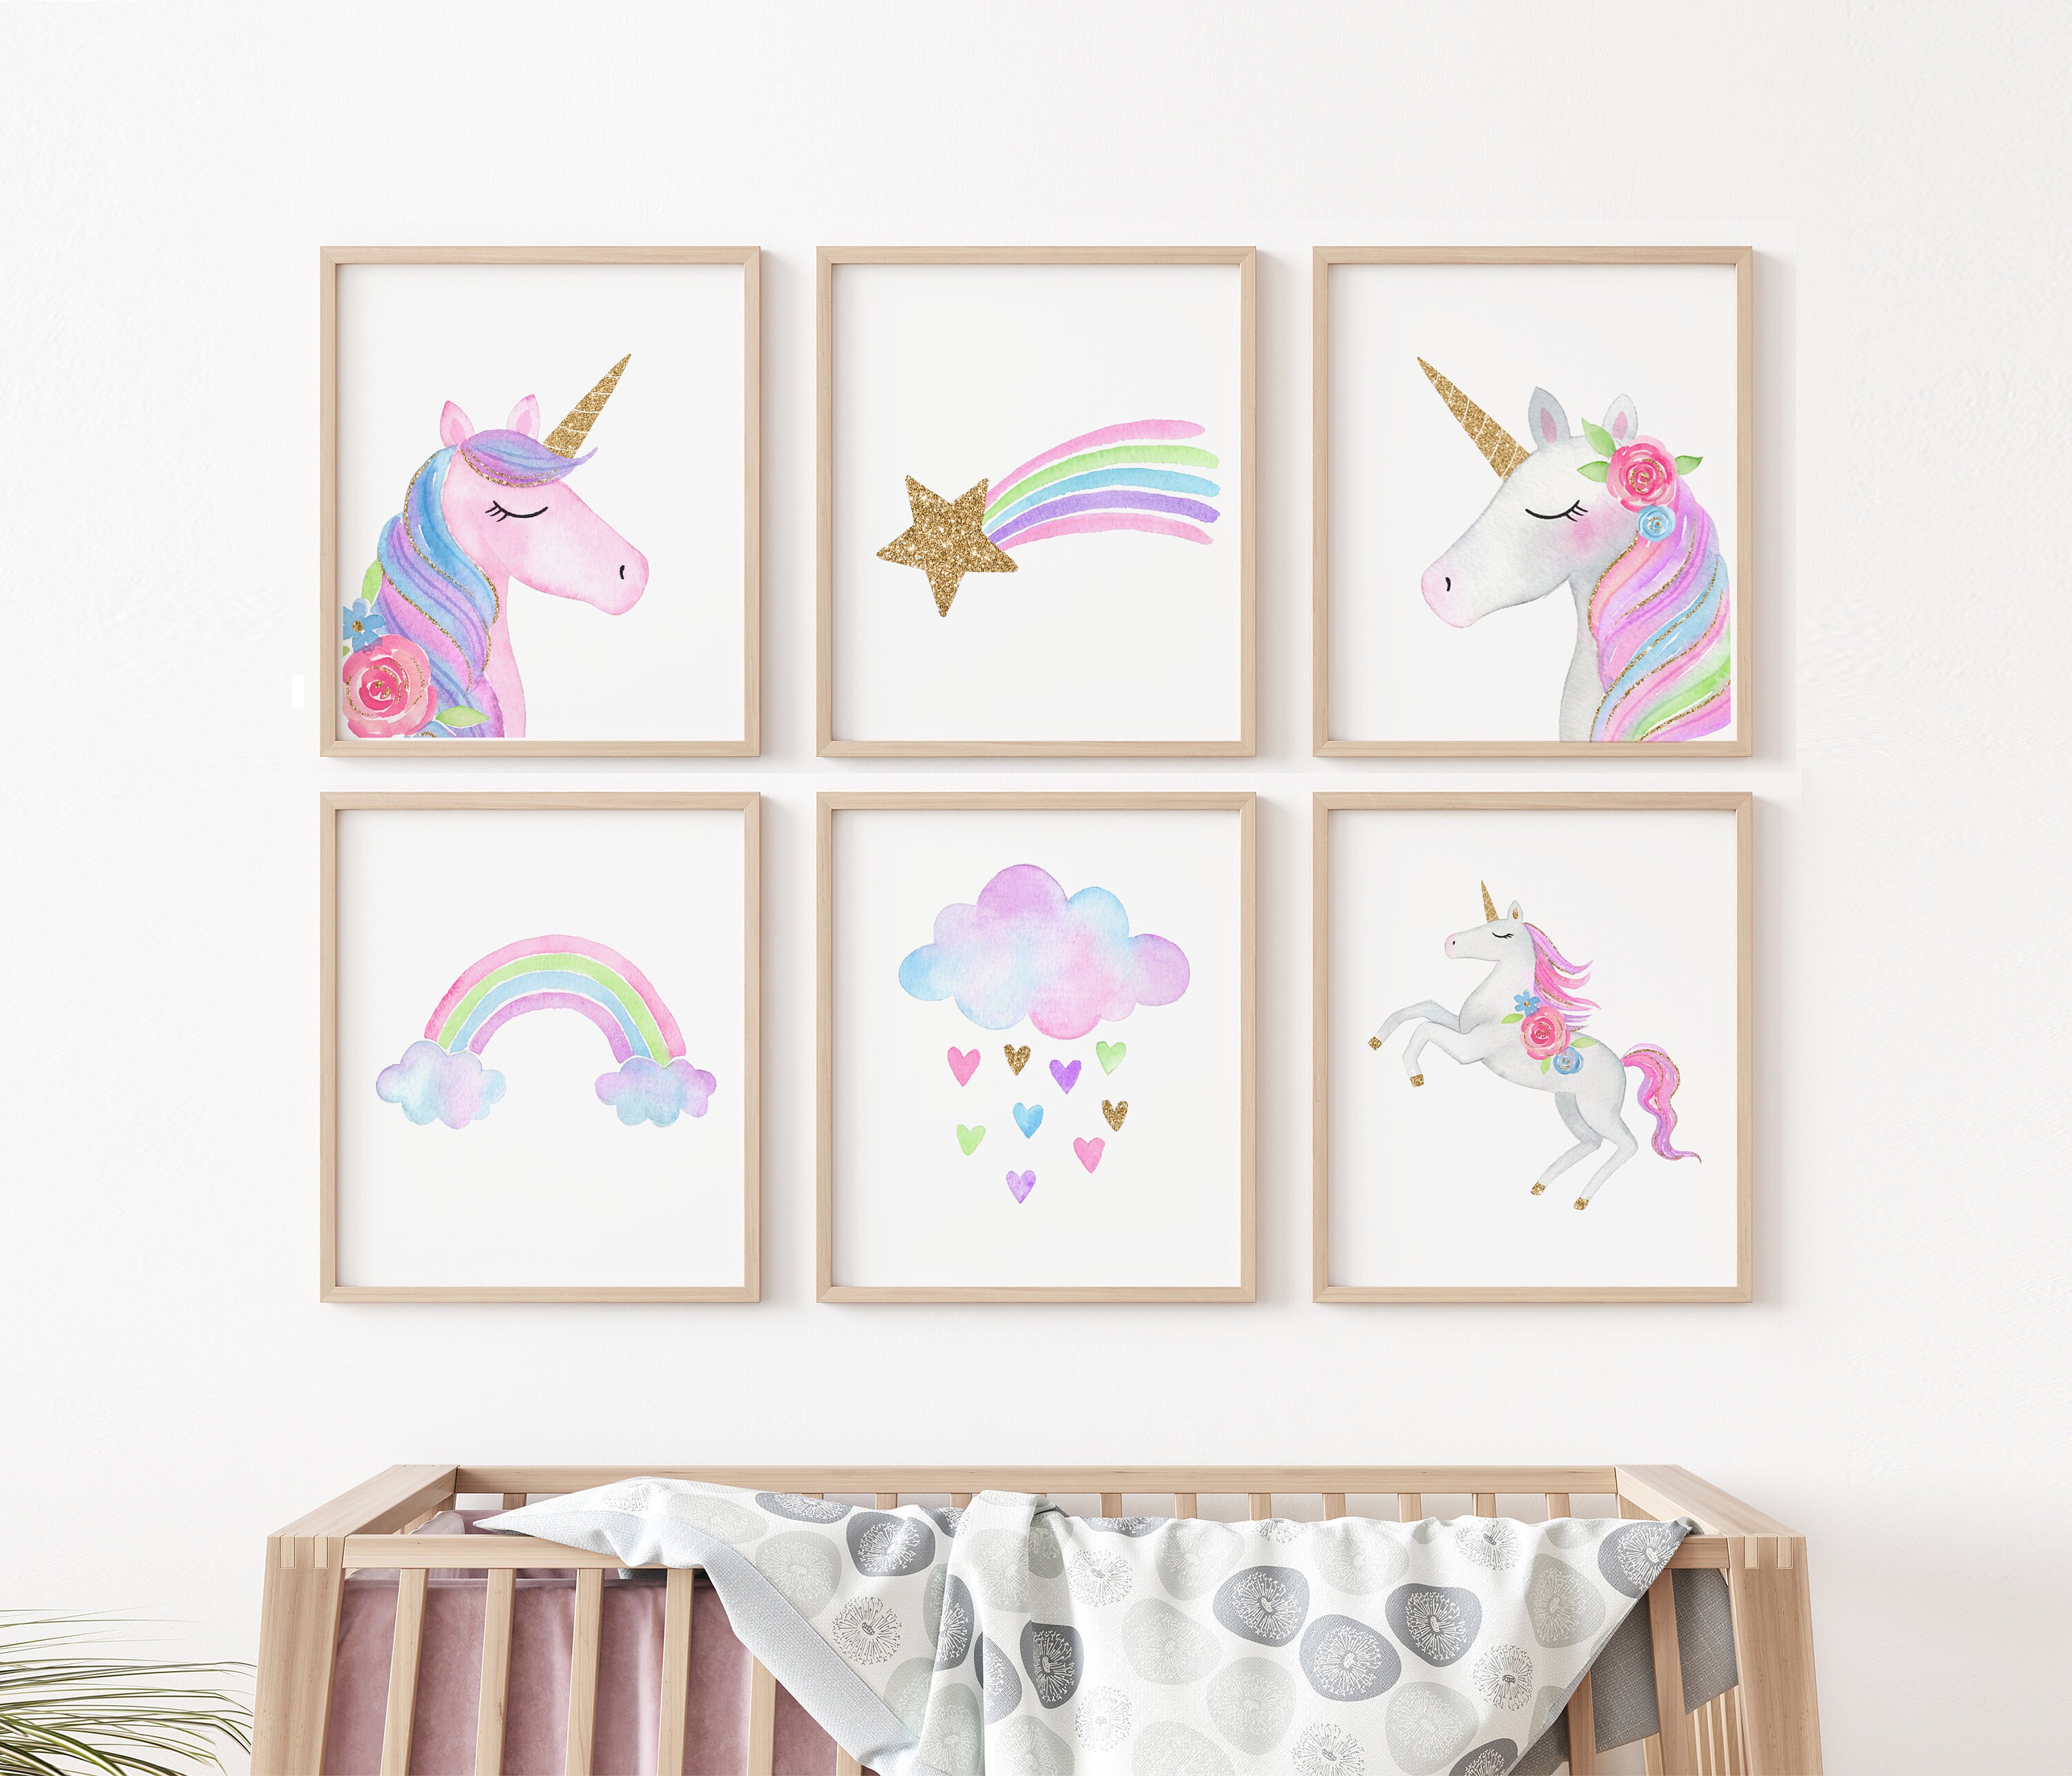 Set of 3 Prints, Personalized Gifts, Art for Kids Hub, Above Bed Decor, Unicorn, Art Print, Love Yourself, Name Sign, Gifts for Kids, Poster, Size: 8